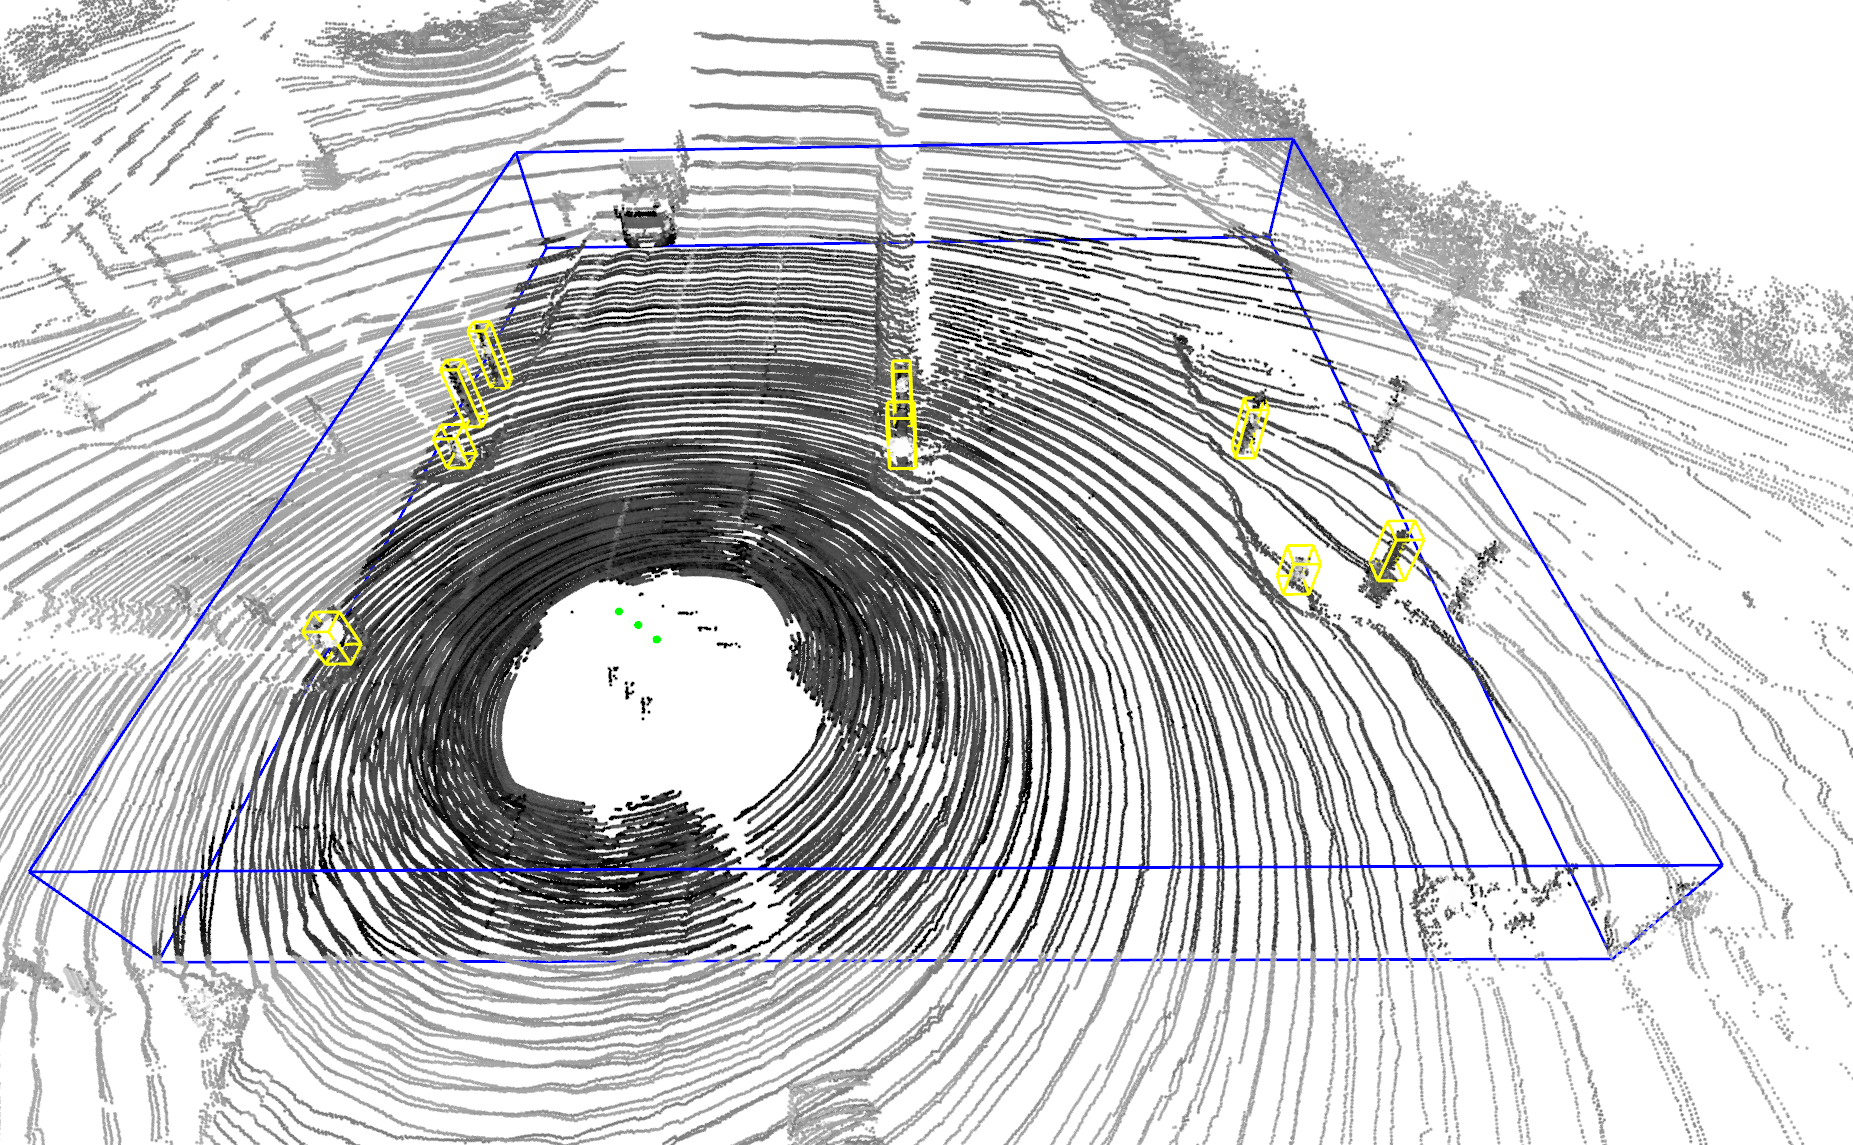 Poles extracted from KITTI 3-D lidar data